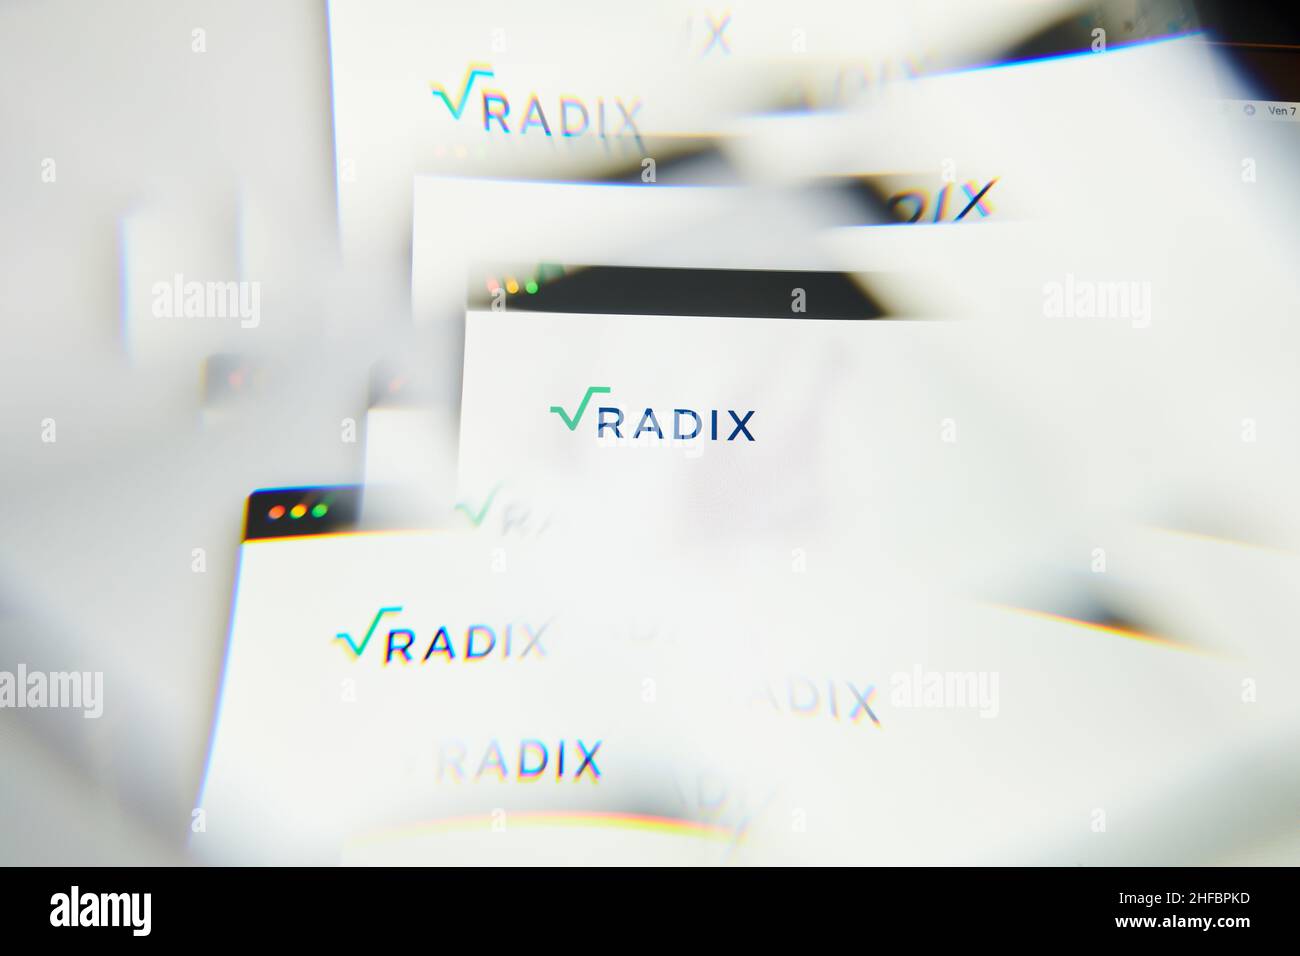 Milan, Italy - January 11, 2022: radix - XRD logo on laptop screen seen through an optical prism. Dynamic and unique image form radix, XRD coin websit Stock Photo